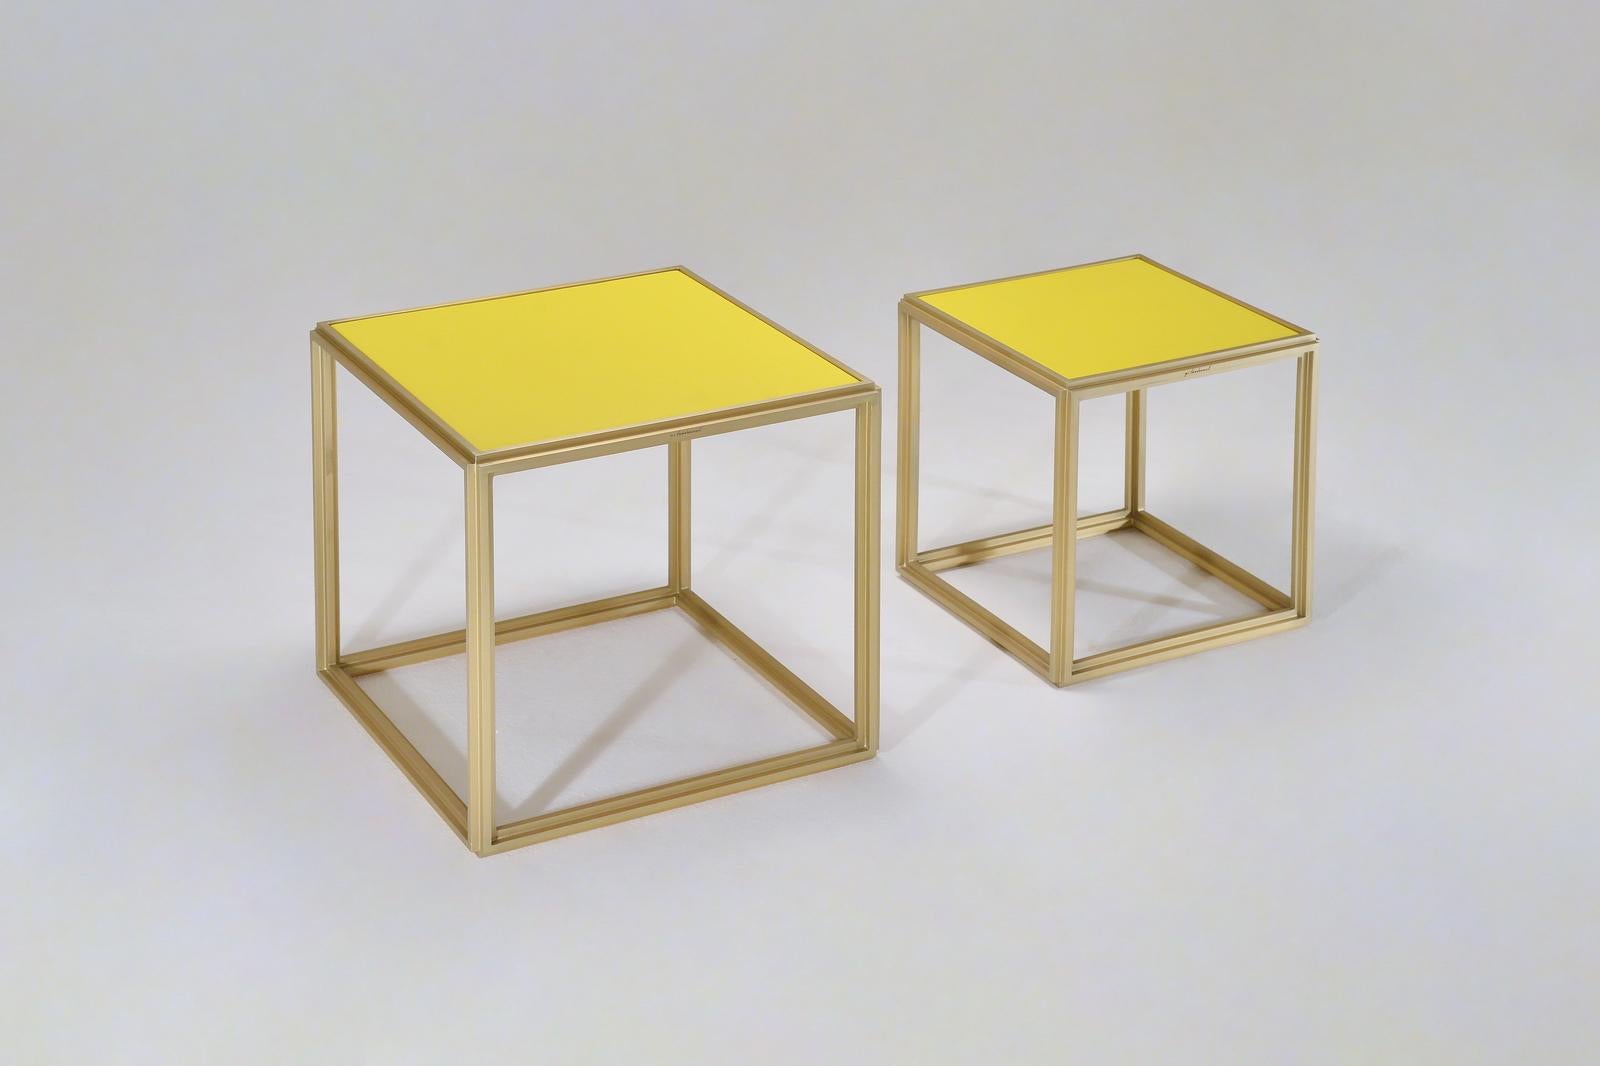 Model: P.Tendercool-BLTs
Frame: Golden sand
Top: Wood top covered in yellow leather
Dimensions: PT8 42 x 42 x 41 cm.
(W x D x H) PT8 16.54 x 16.54 x 16.14 inch

Available now - one of a kind 

Collection of two Brass Low Tables, with wood tops